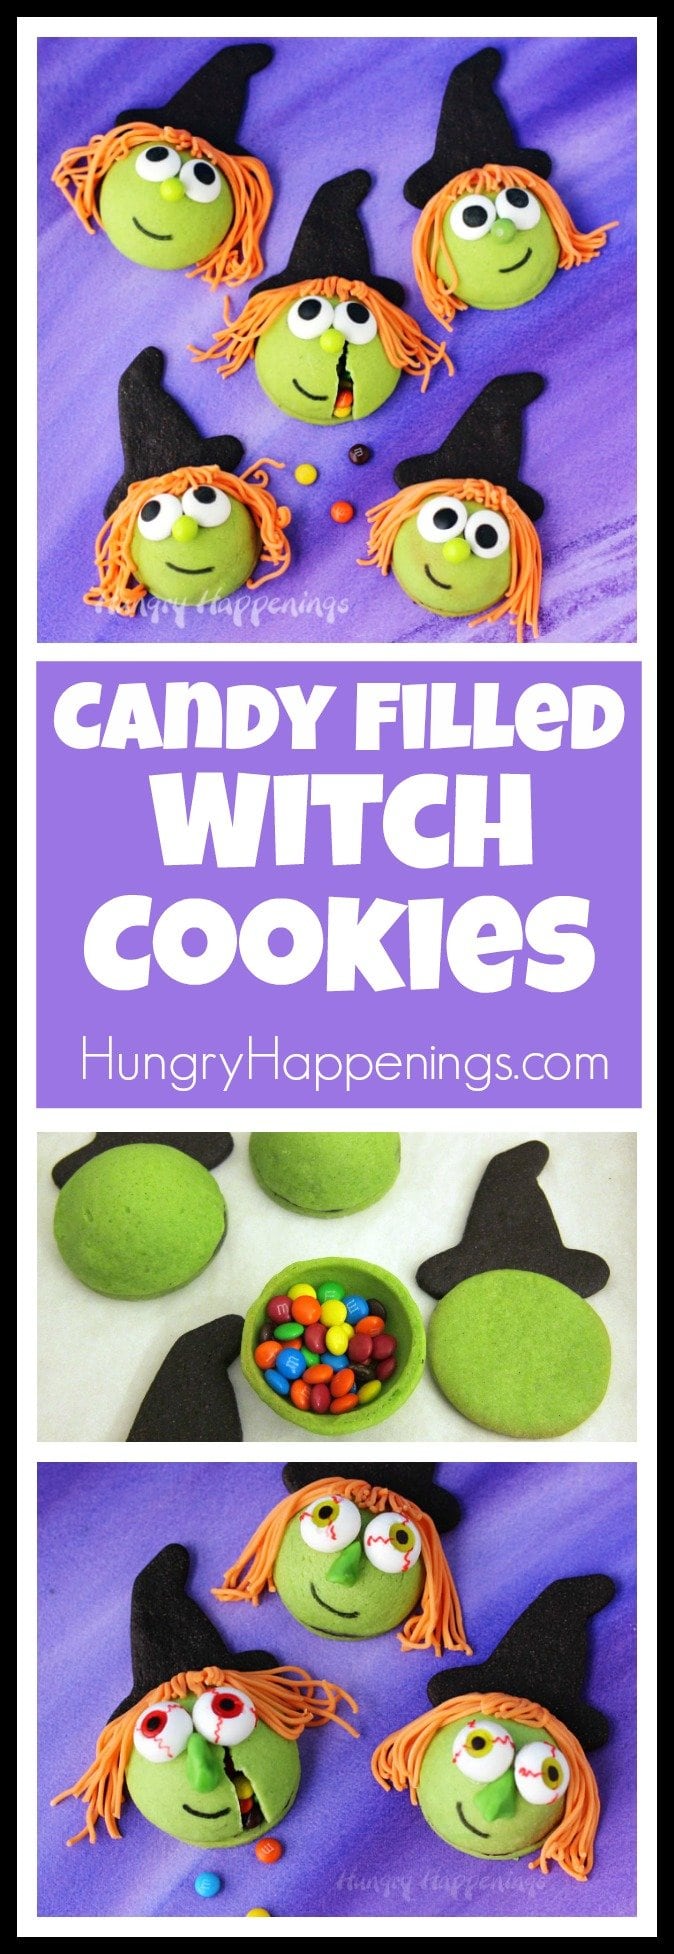 Make cute or kooky Candy Filled Witch Cookies for your Halloween parties or bake sales. 